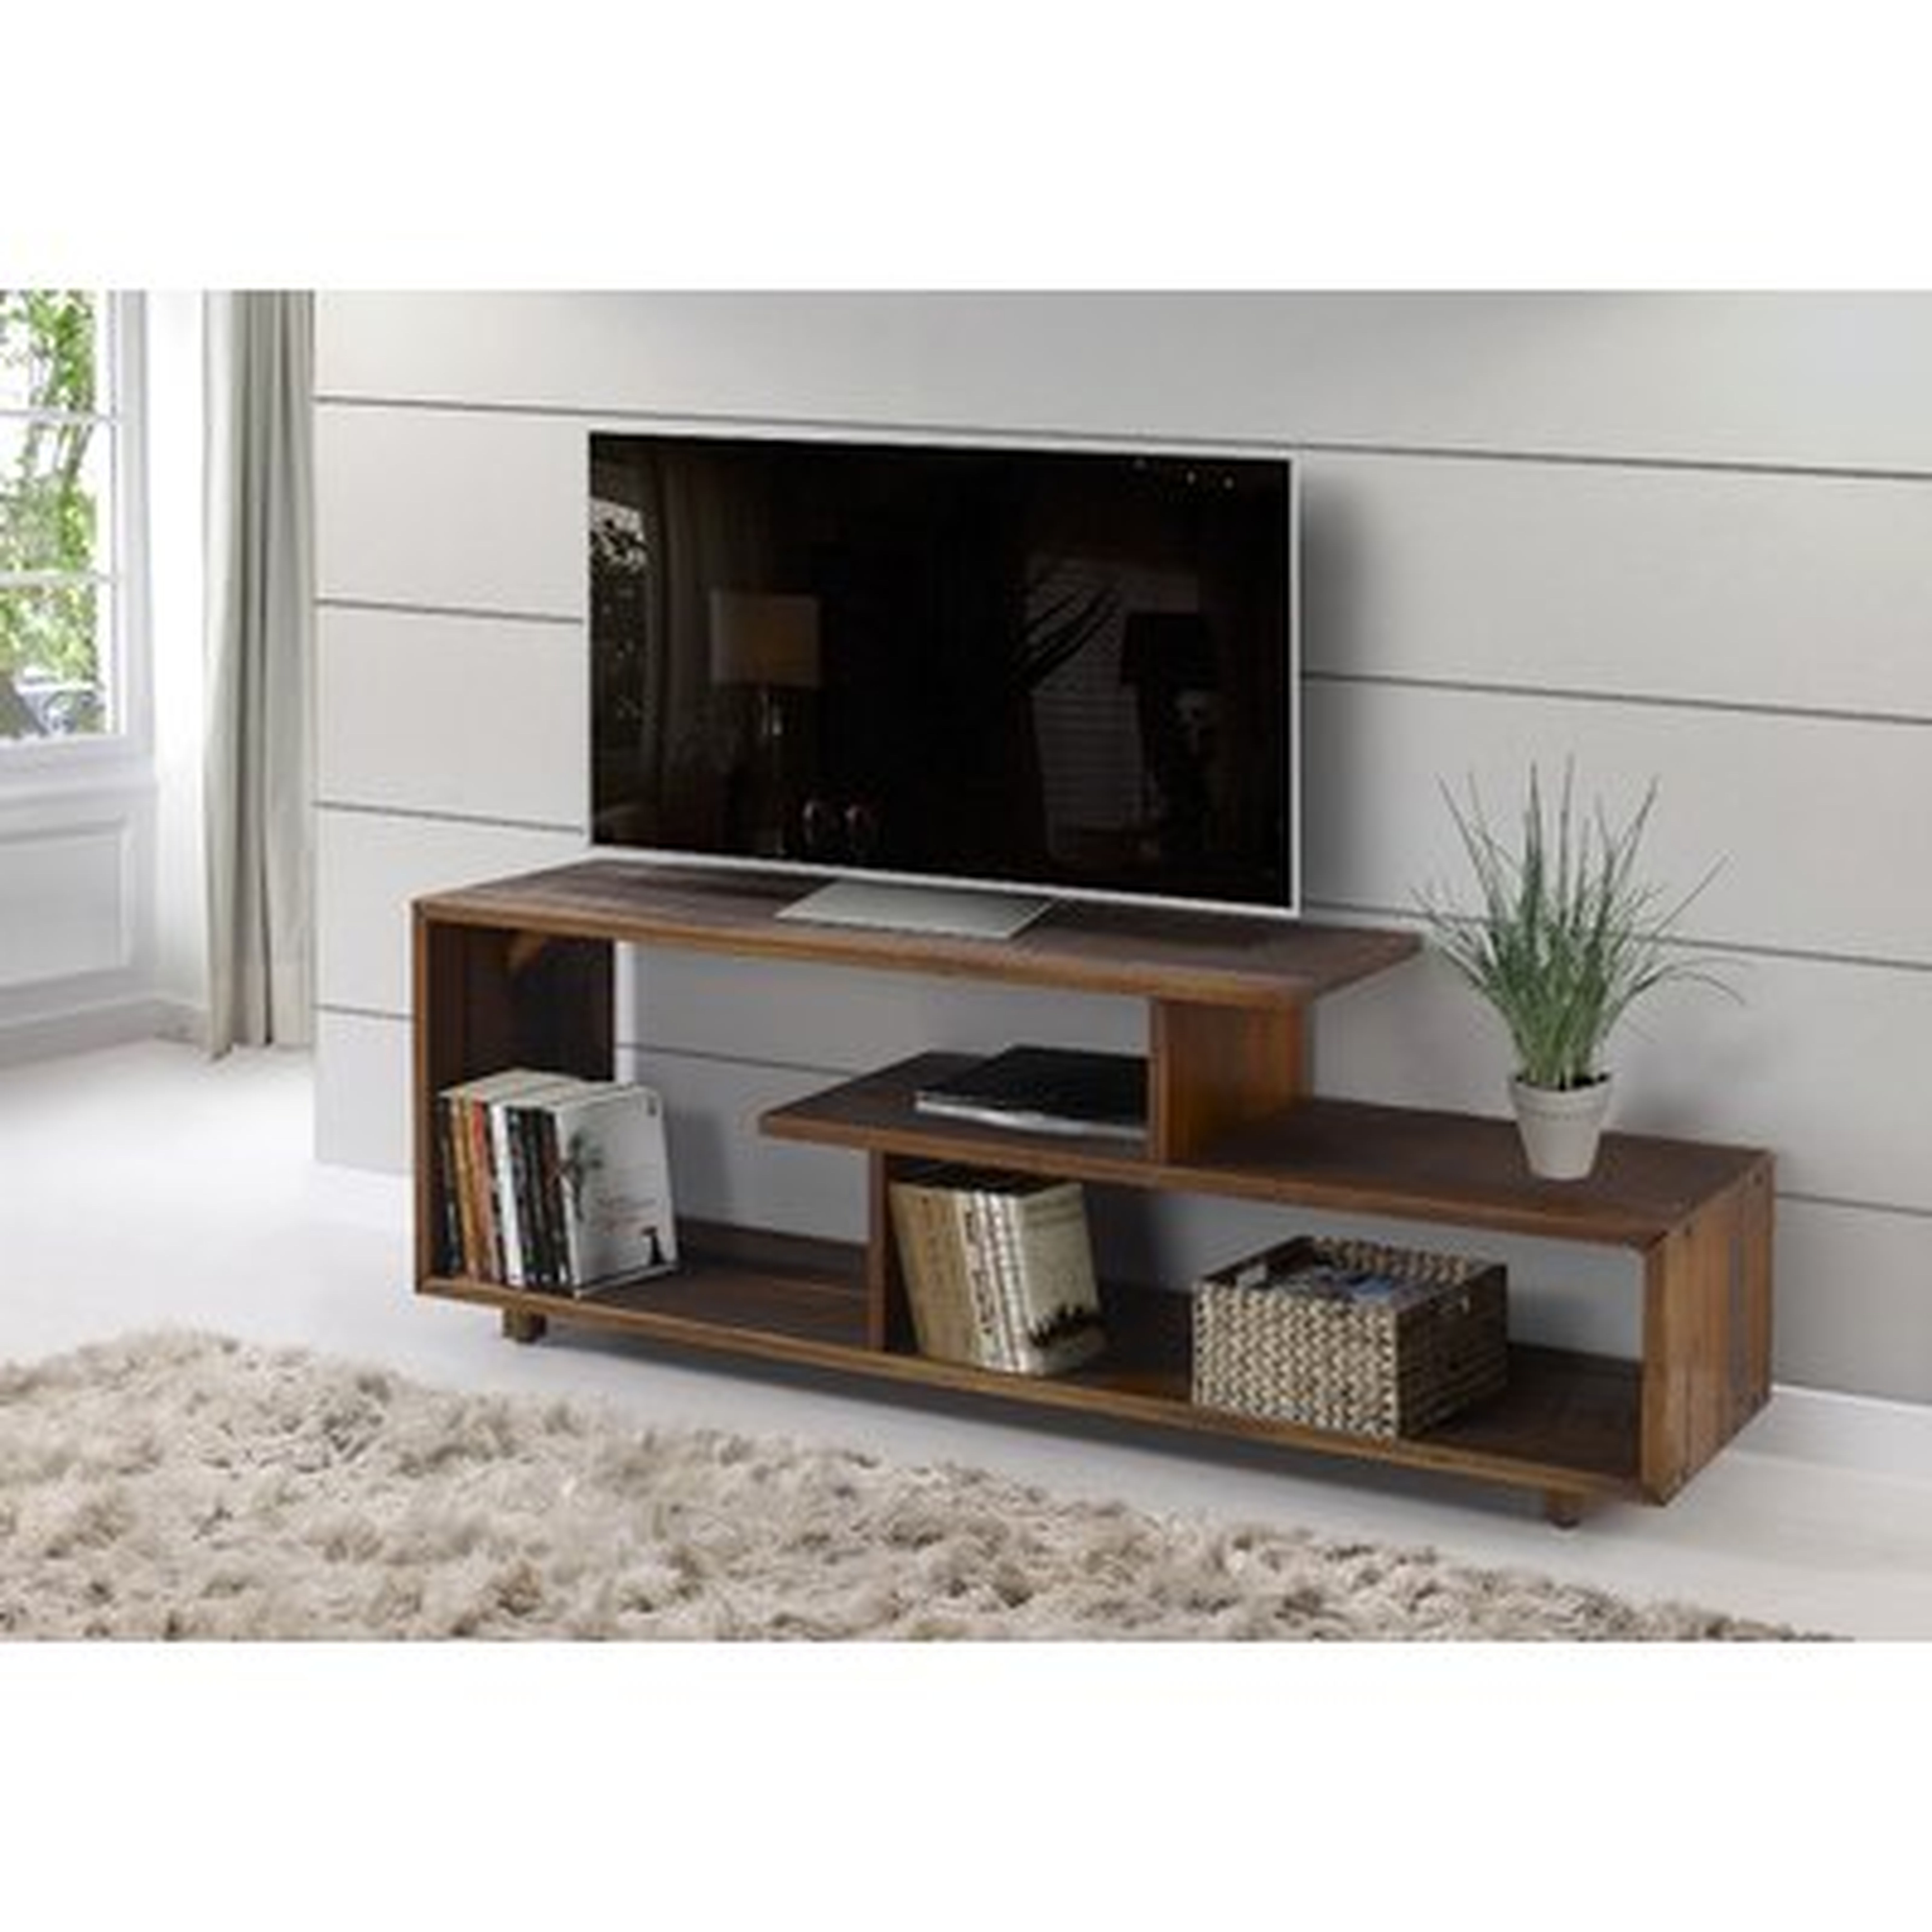 Carrasco Solid Wood TV Stand for TVs up to 60 inches - AllModern